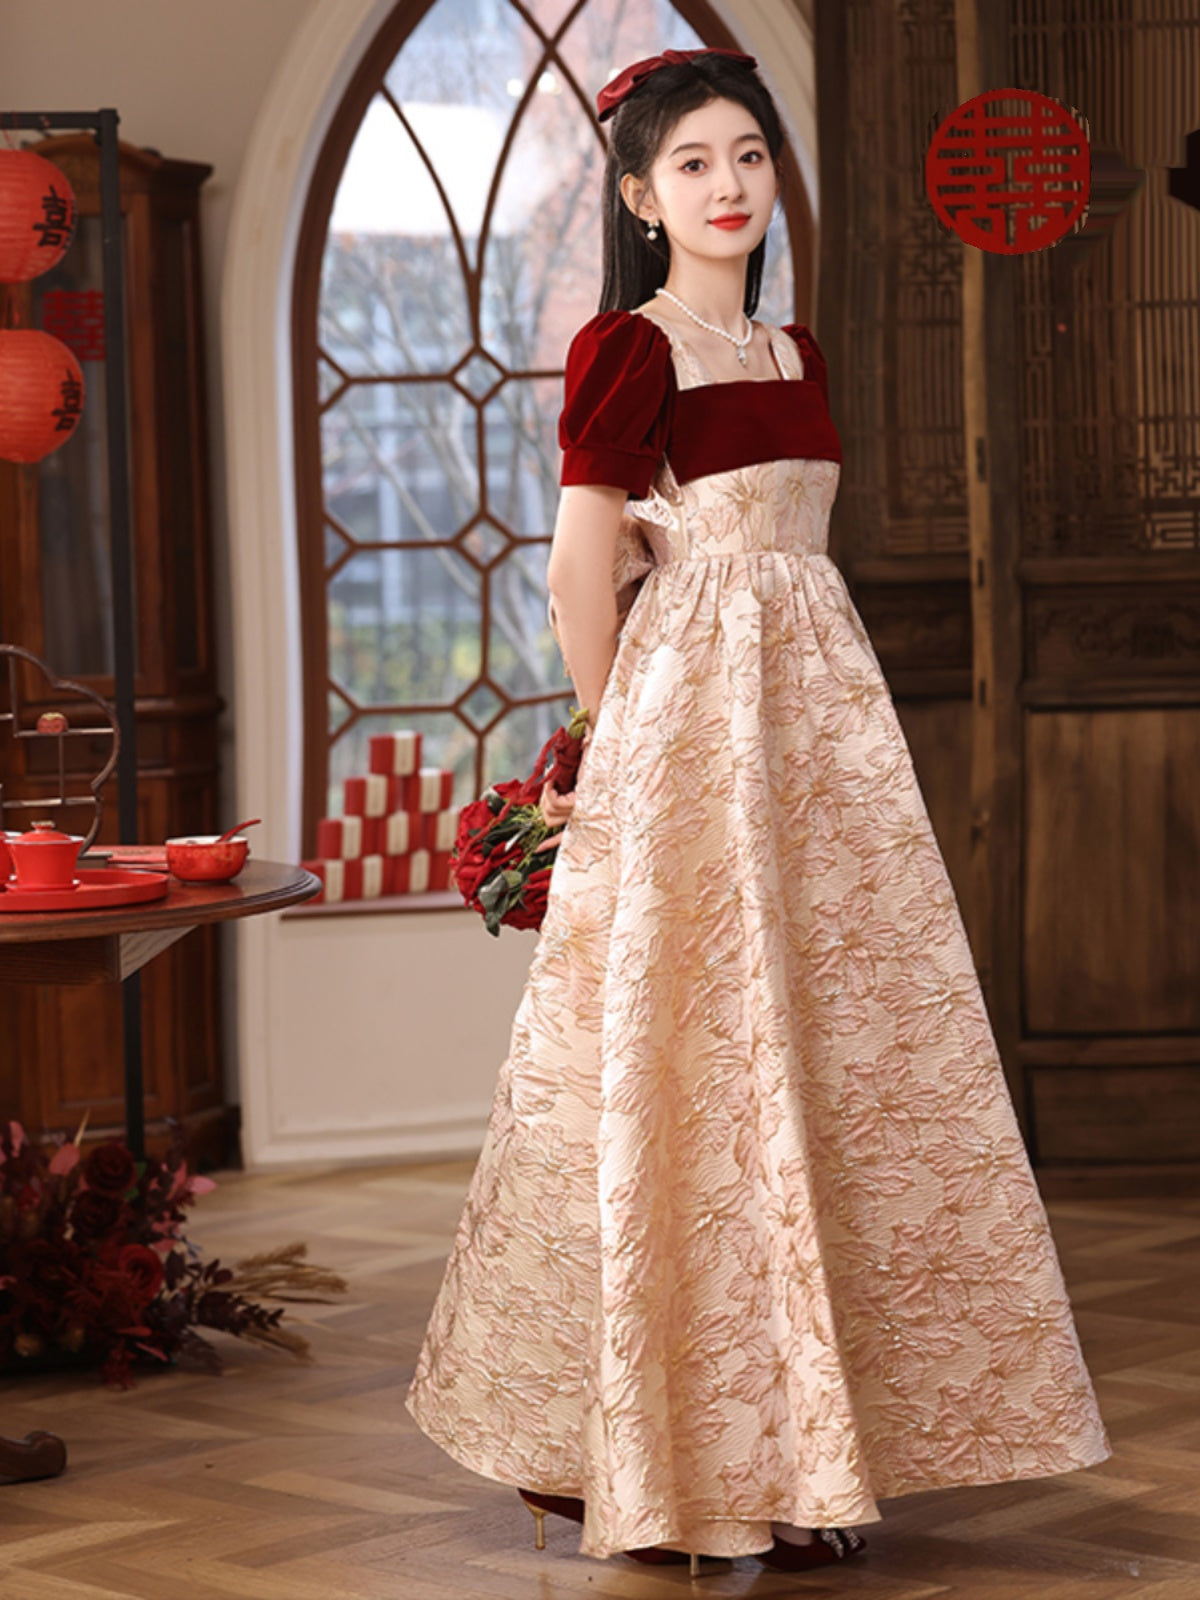 Vintage-Inspired Floral Jacquard Ball Gown with Velvet Accents - Harmony Gallery